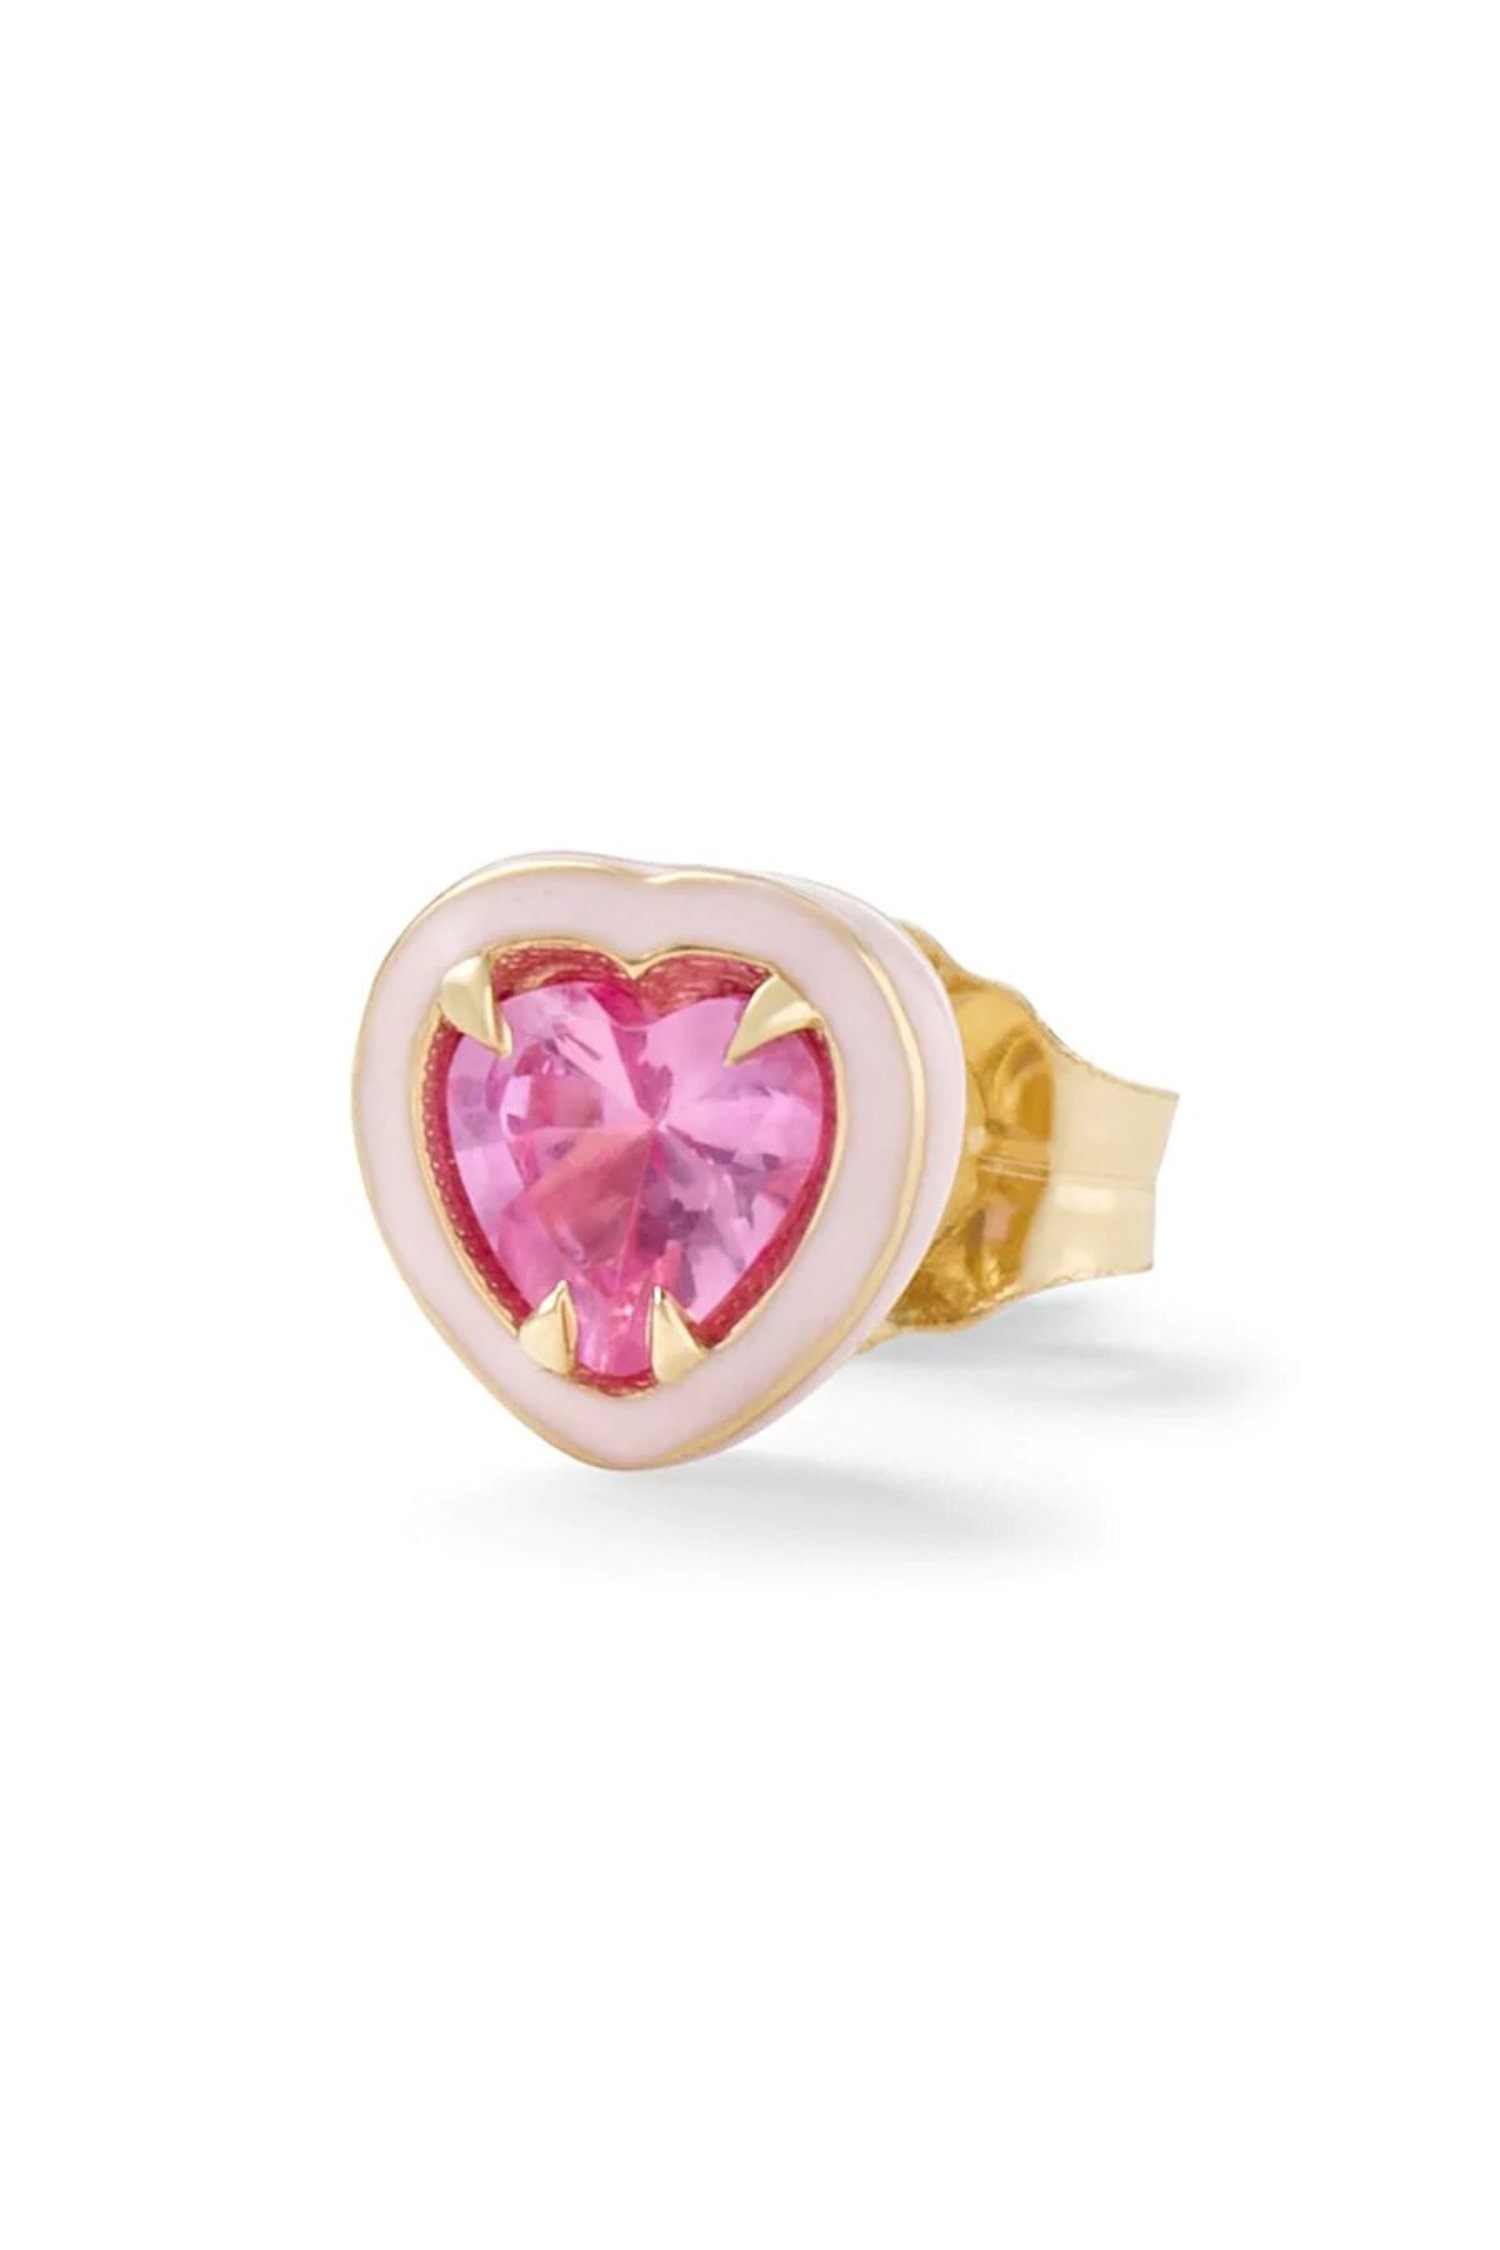 Mini Pink Sapphire Heart Cocktail Stud in 14K Yellow Gold